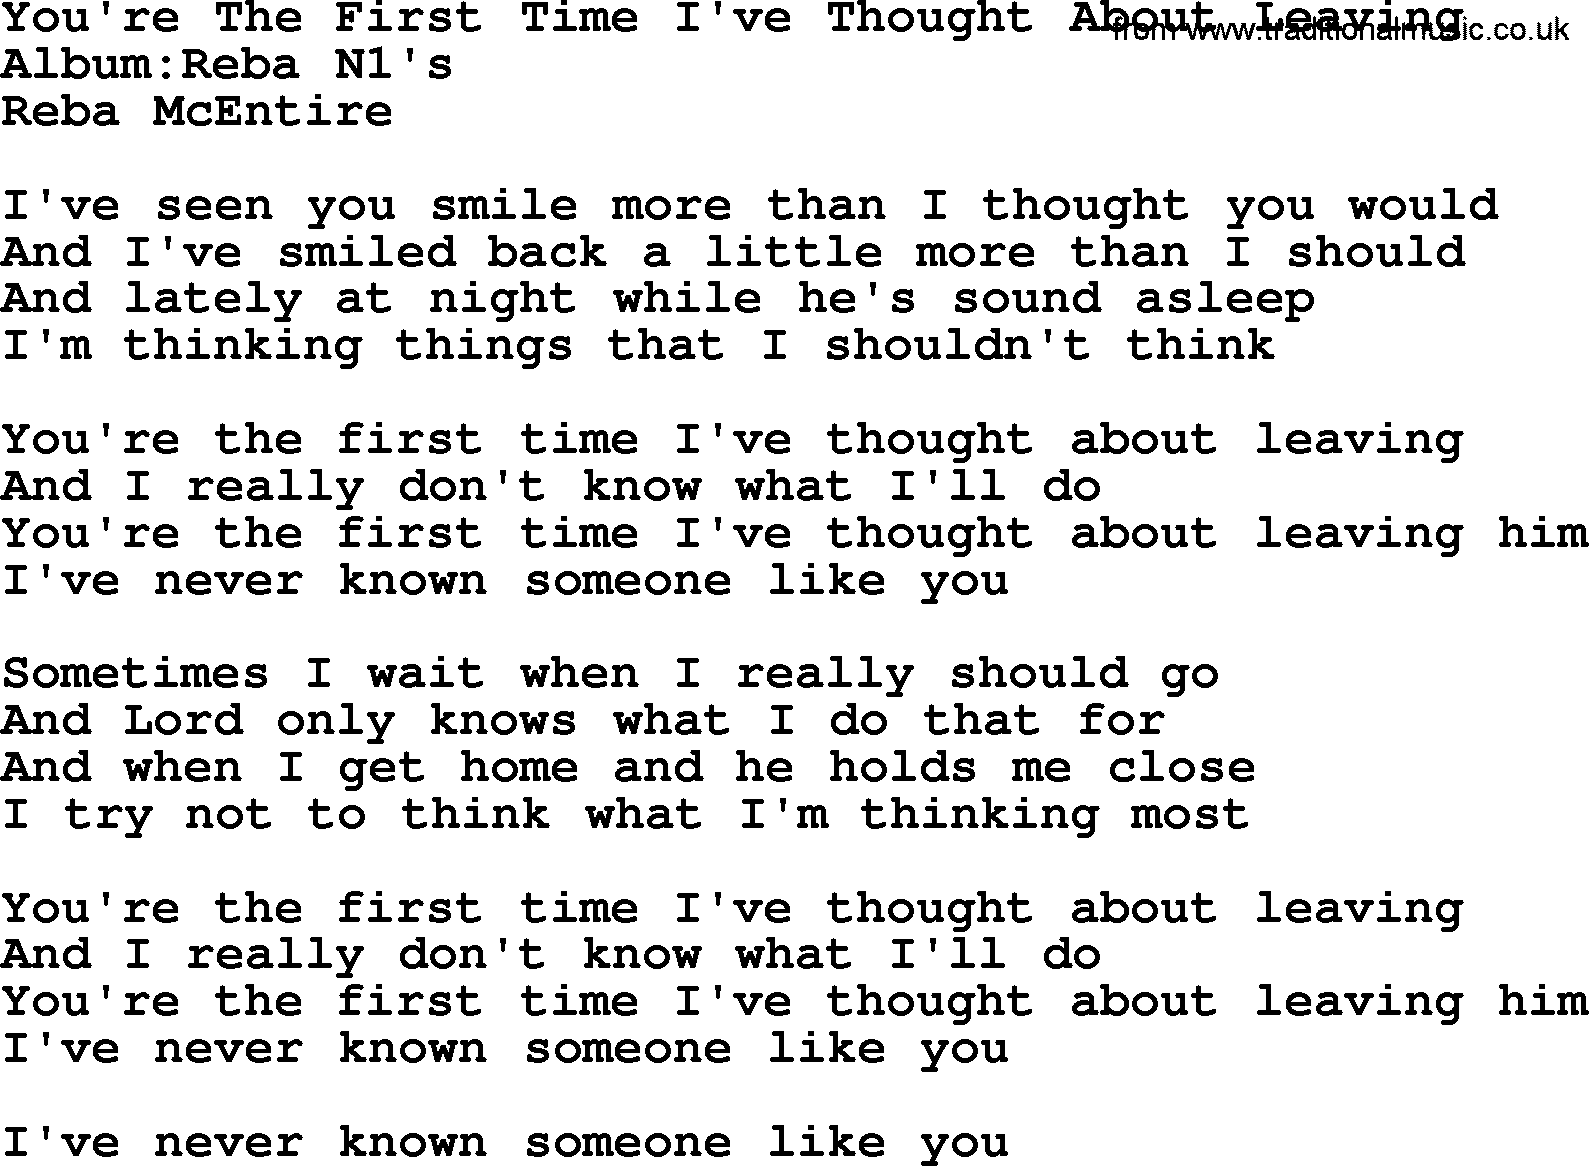 Reba McEntire song: You're The First Time I've Thought About Leaving lyrics